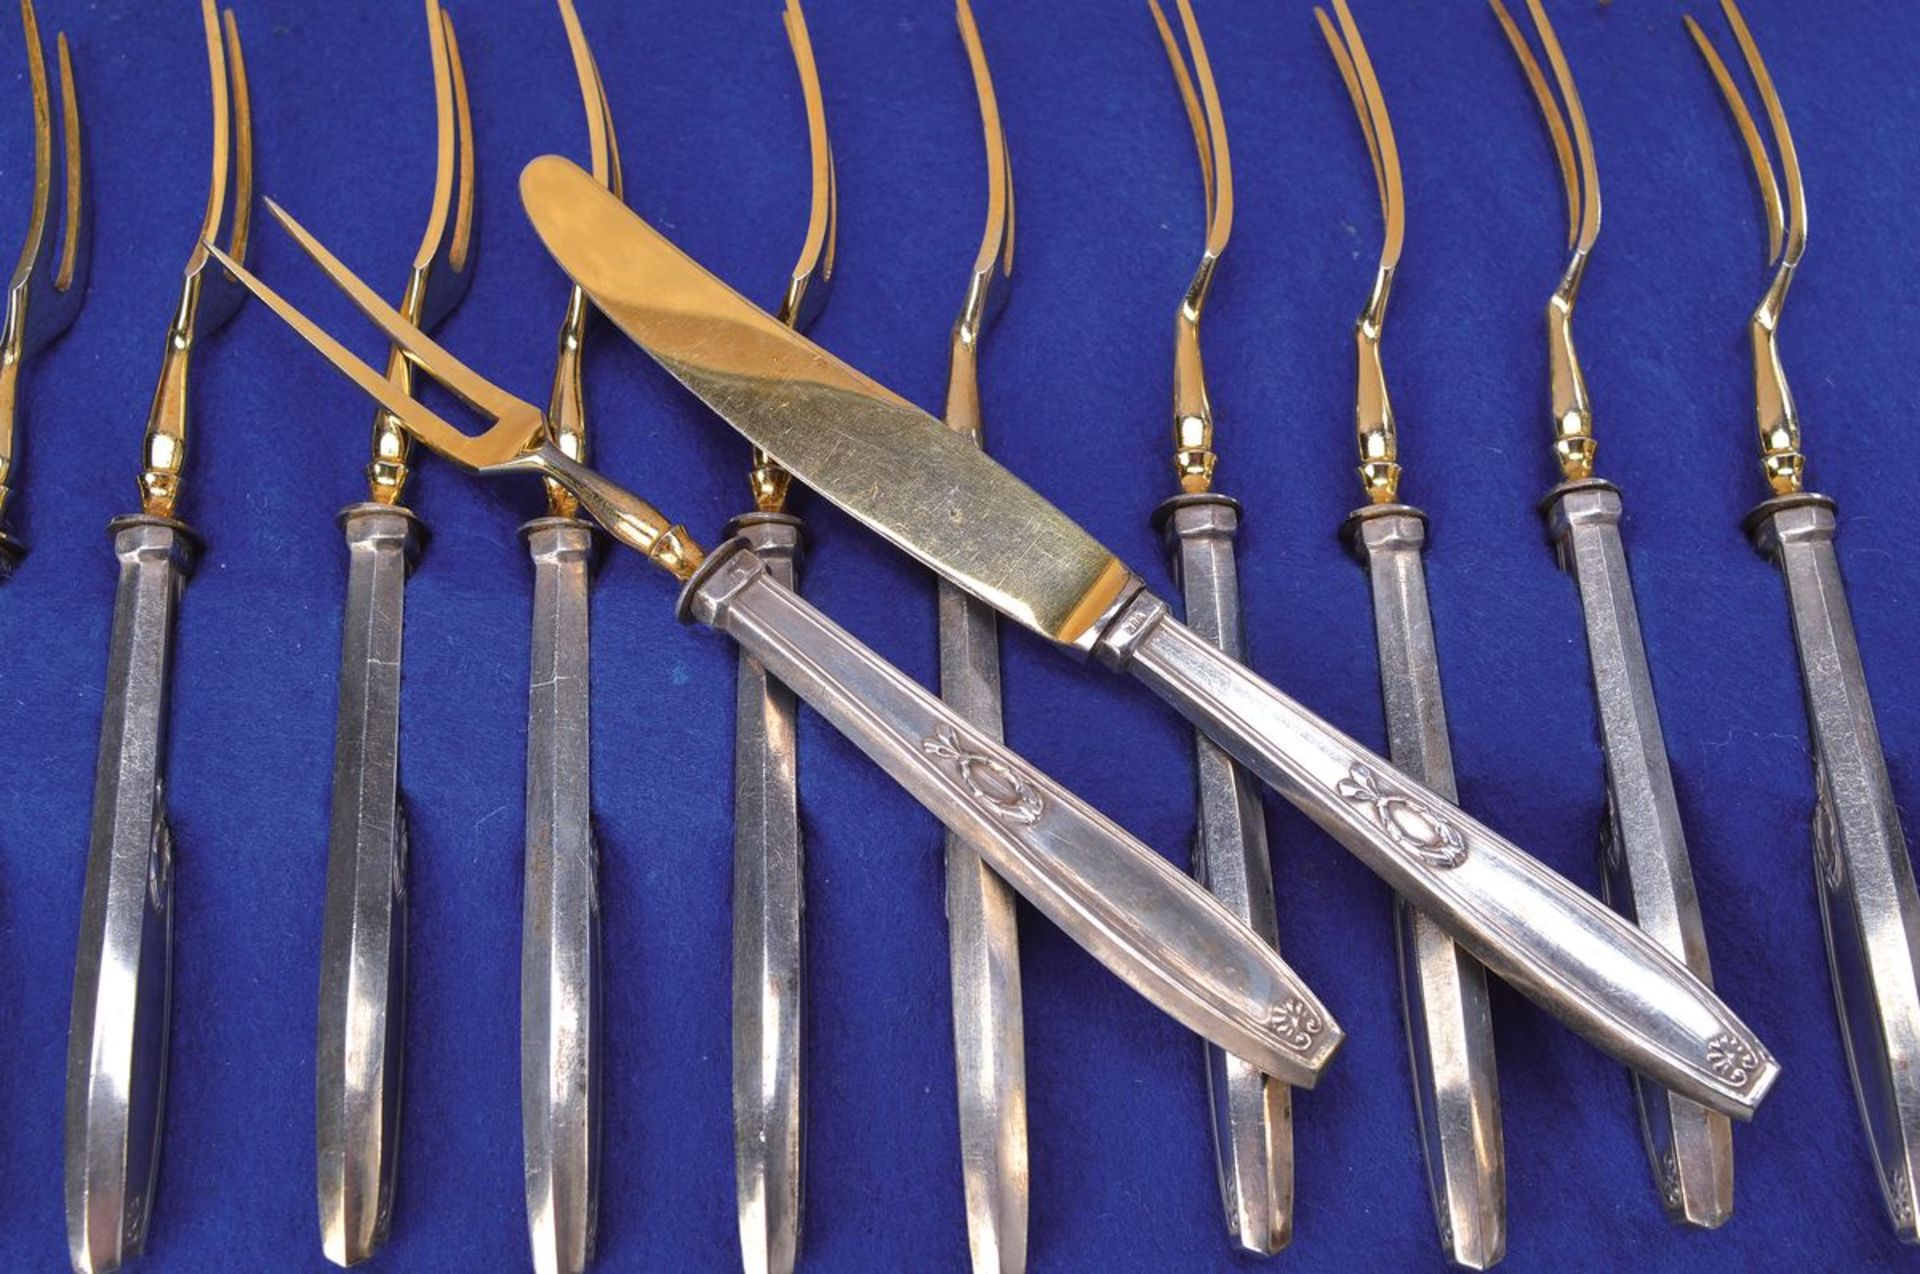 Fruit cutlery, German, around 1900, 800 silver, 11 forks, 12 knives, using parts gilt,L. approx.,